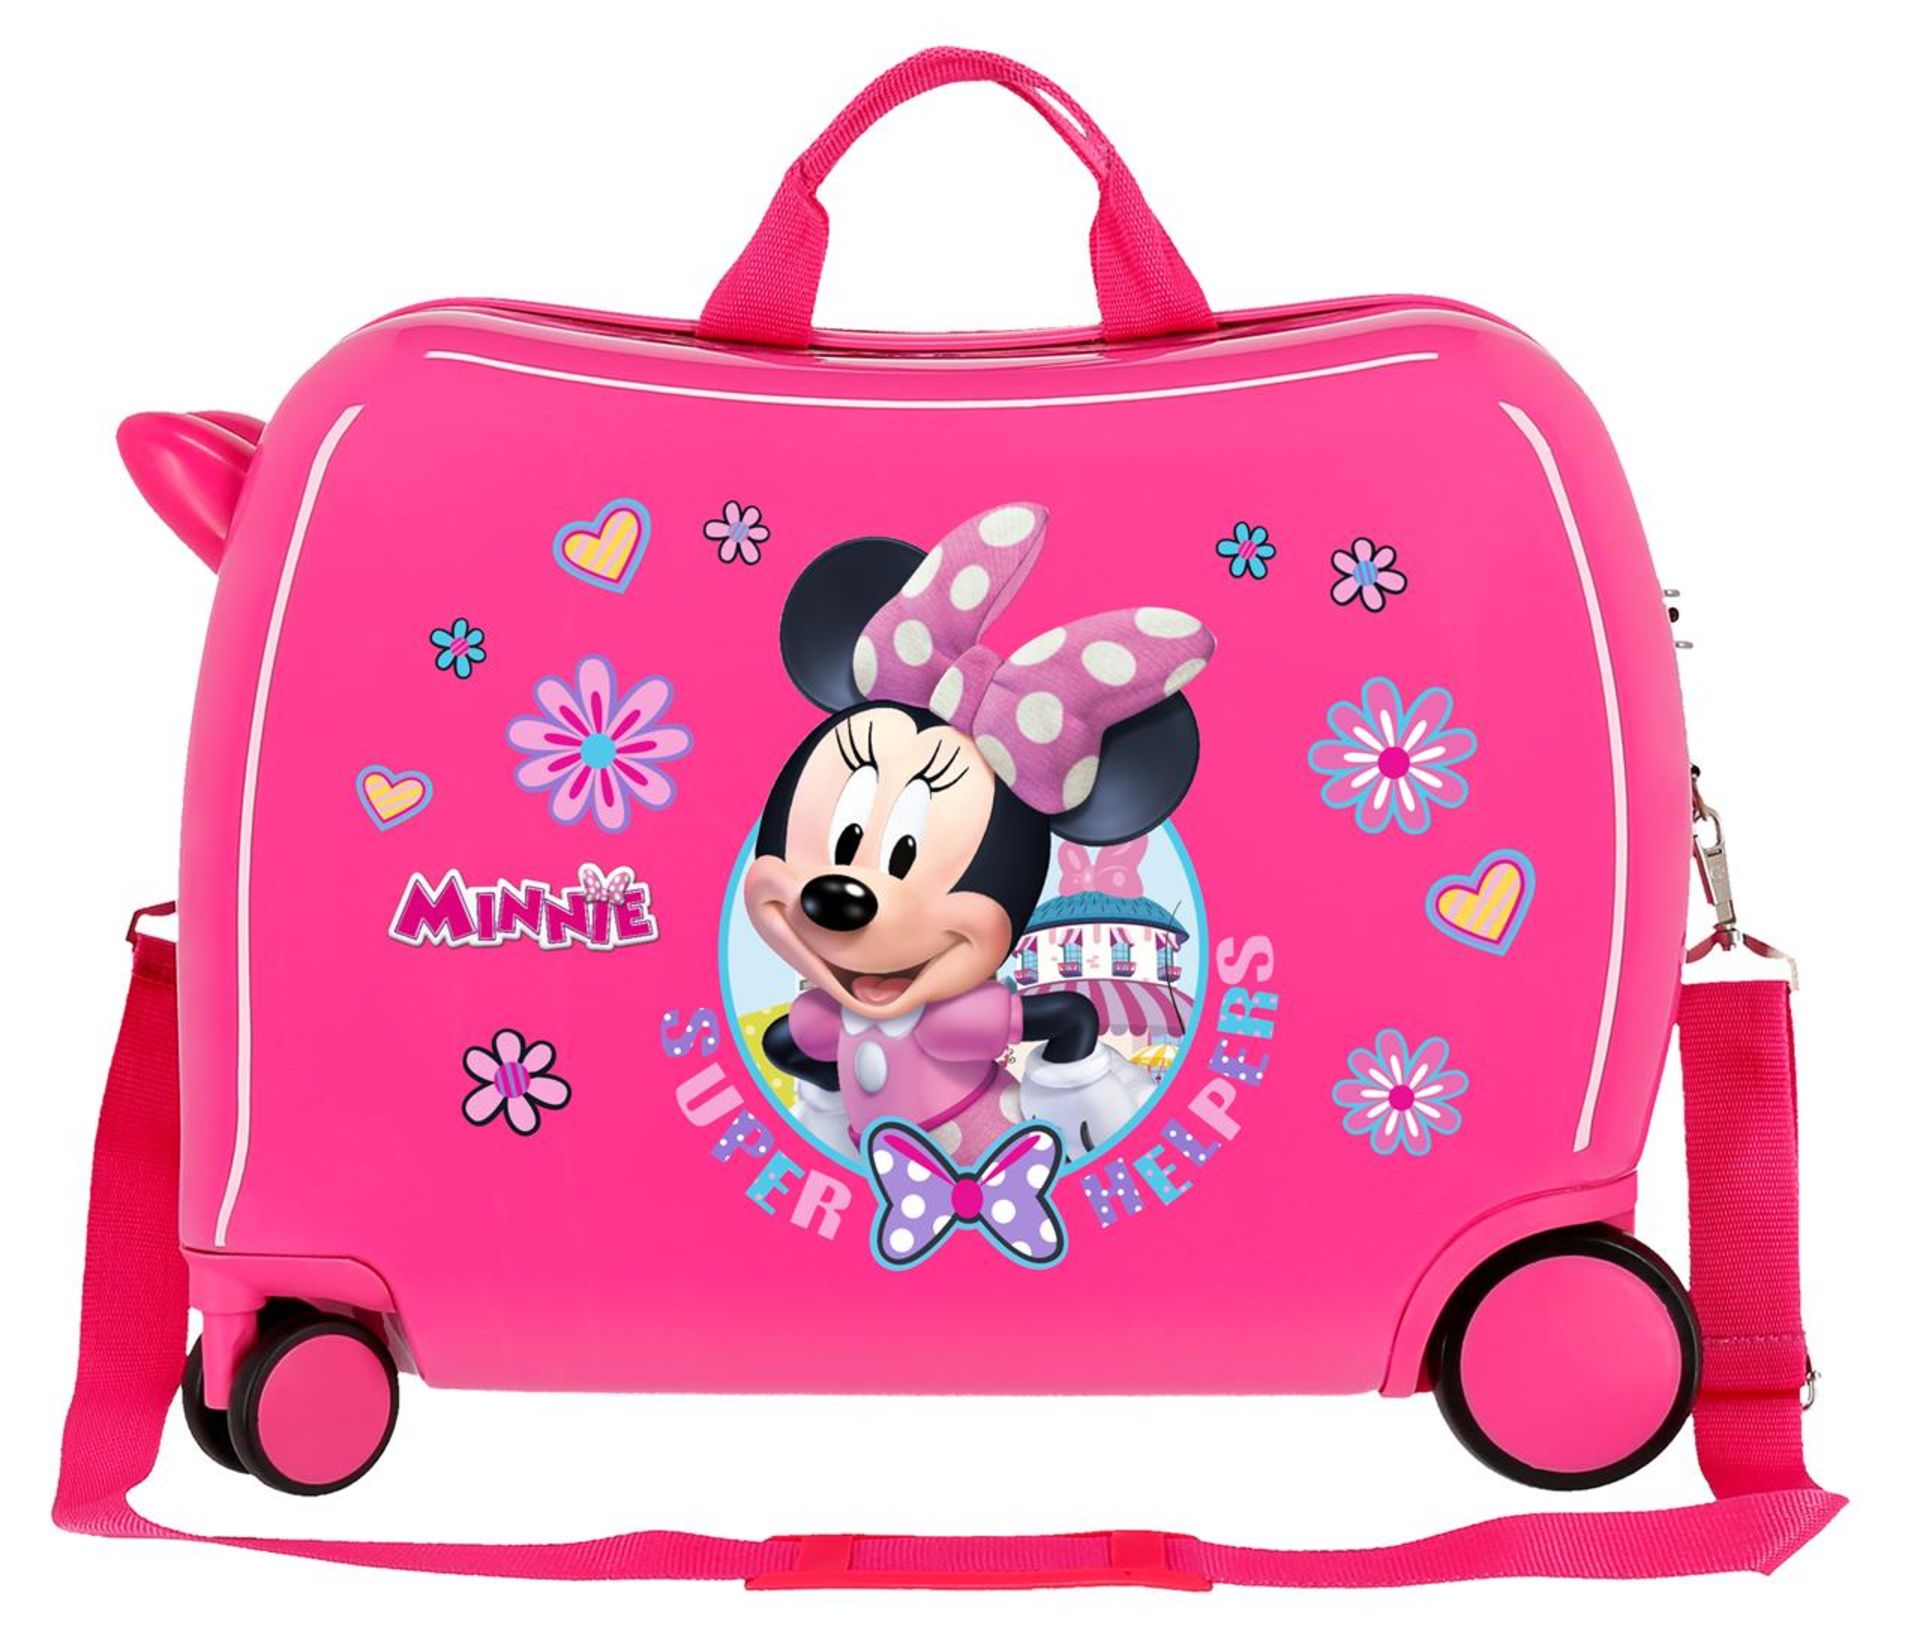 Pallet Of 48 Joumma Bags Rolling Suitcases In Various Disney Designs And Colours 50X38X20 Cm - Image 76 of 102